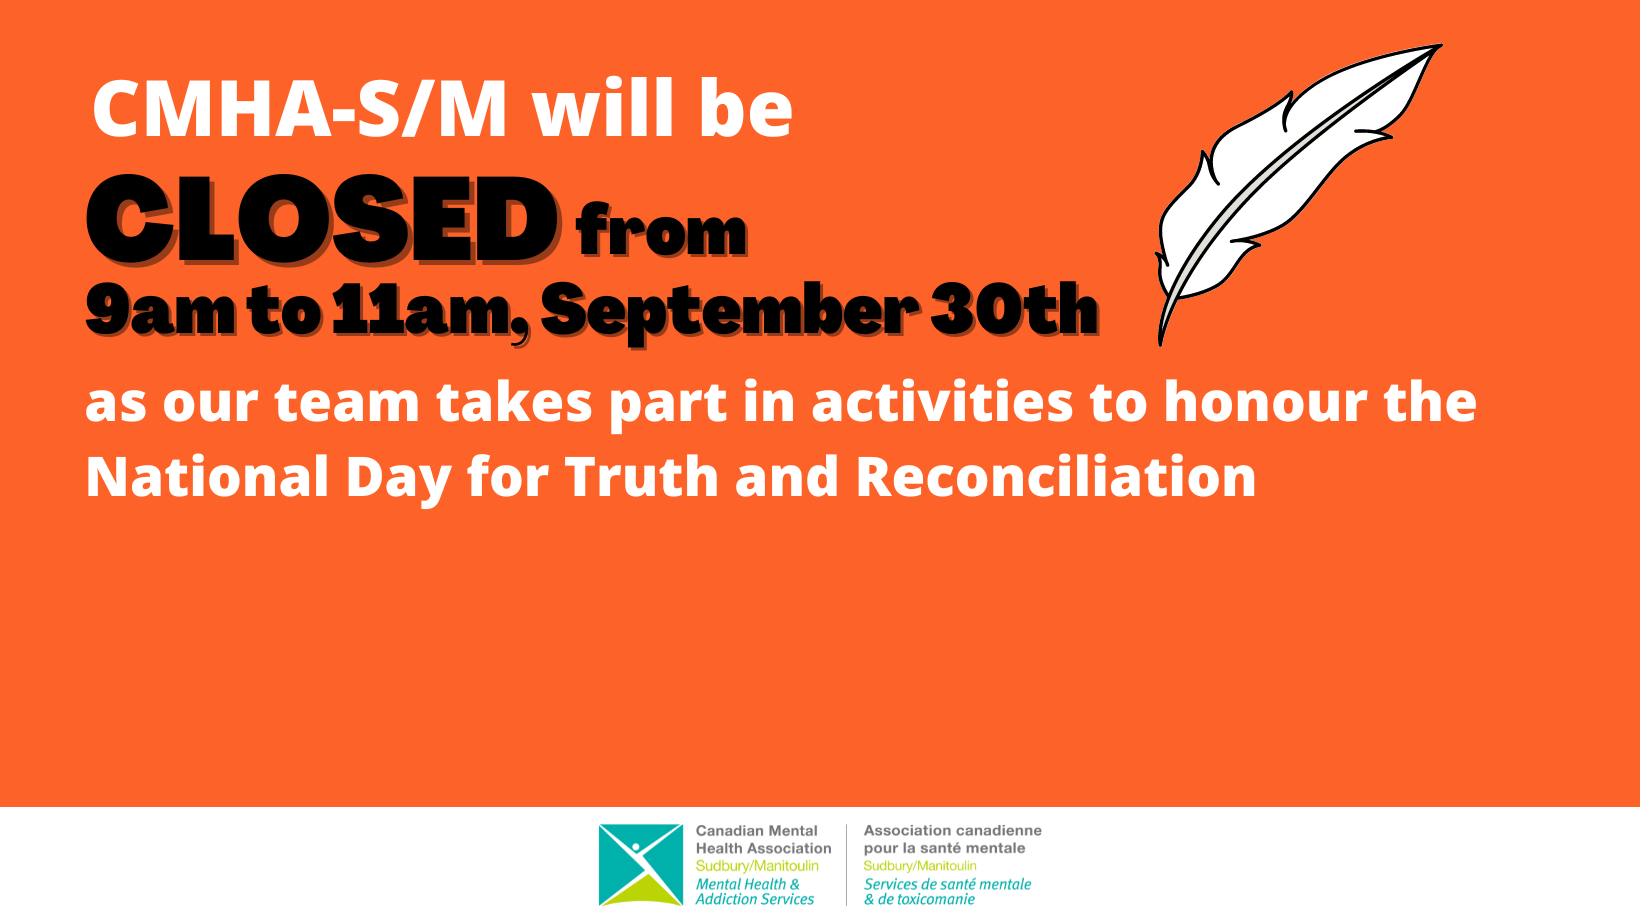 Honouring National Day for Truth and Reconciliation